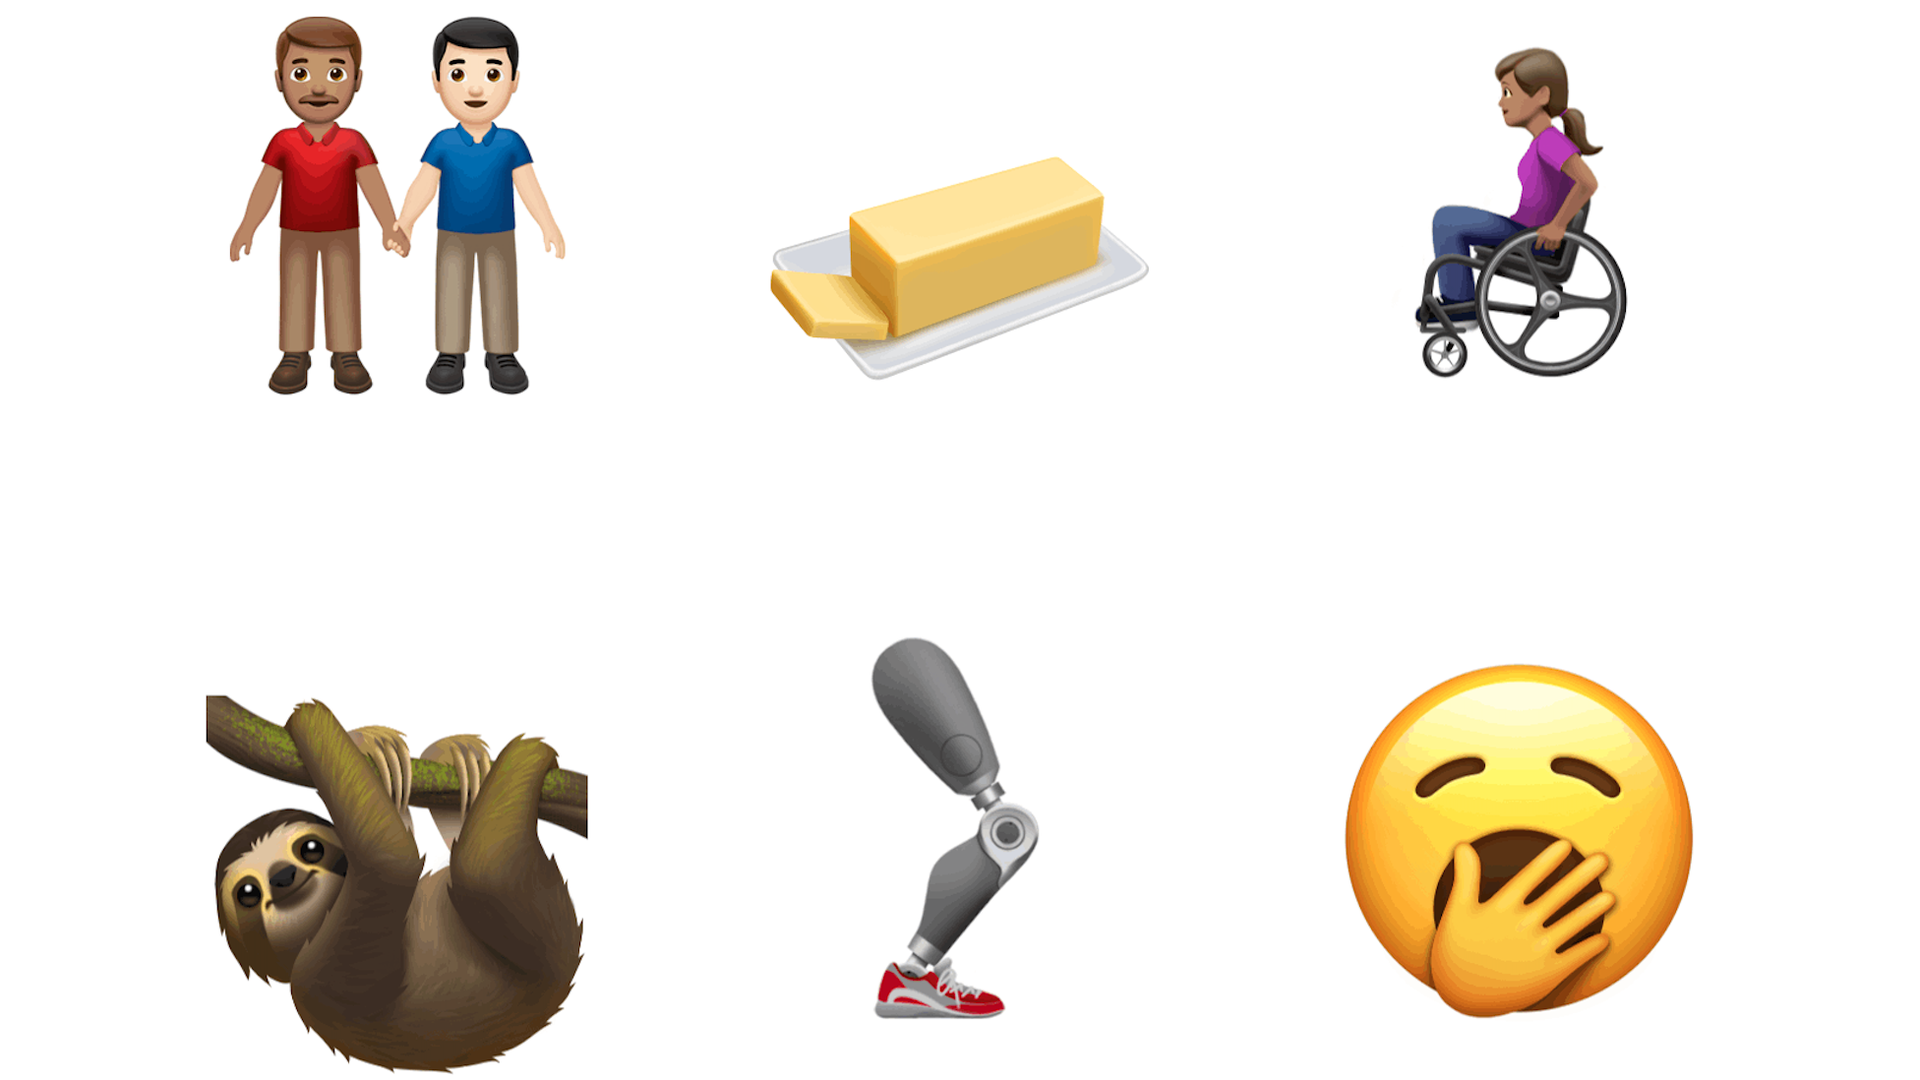 New emoji coming to iOS later this year include a prosthetic limb, mixed-race gay couple, a sloth and a wheelchair user